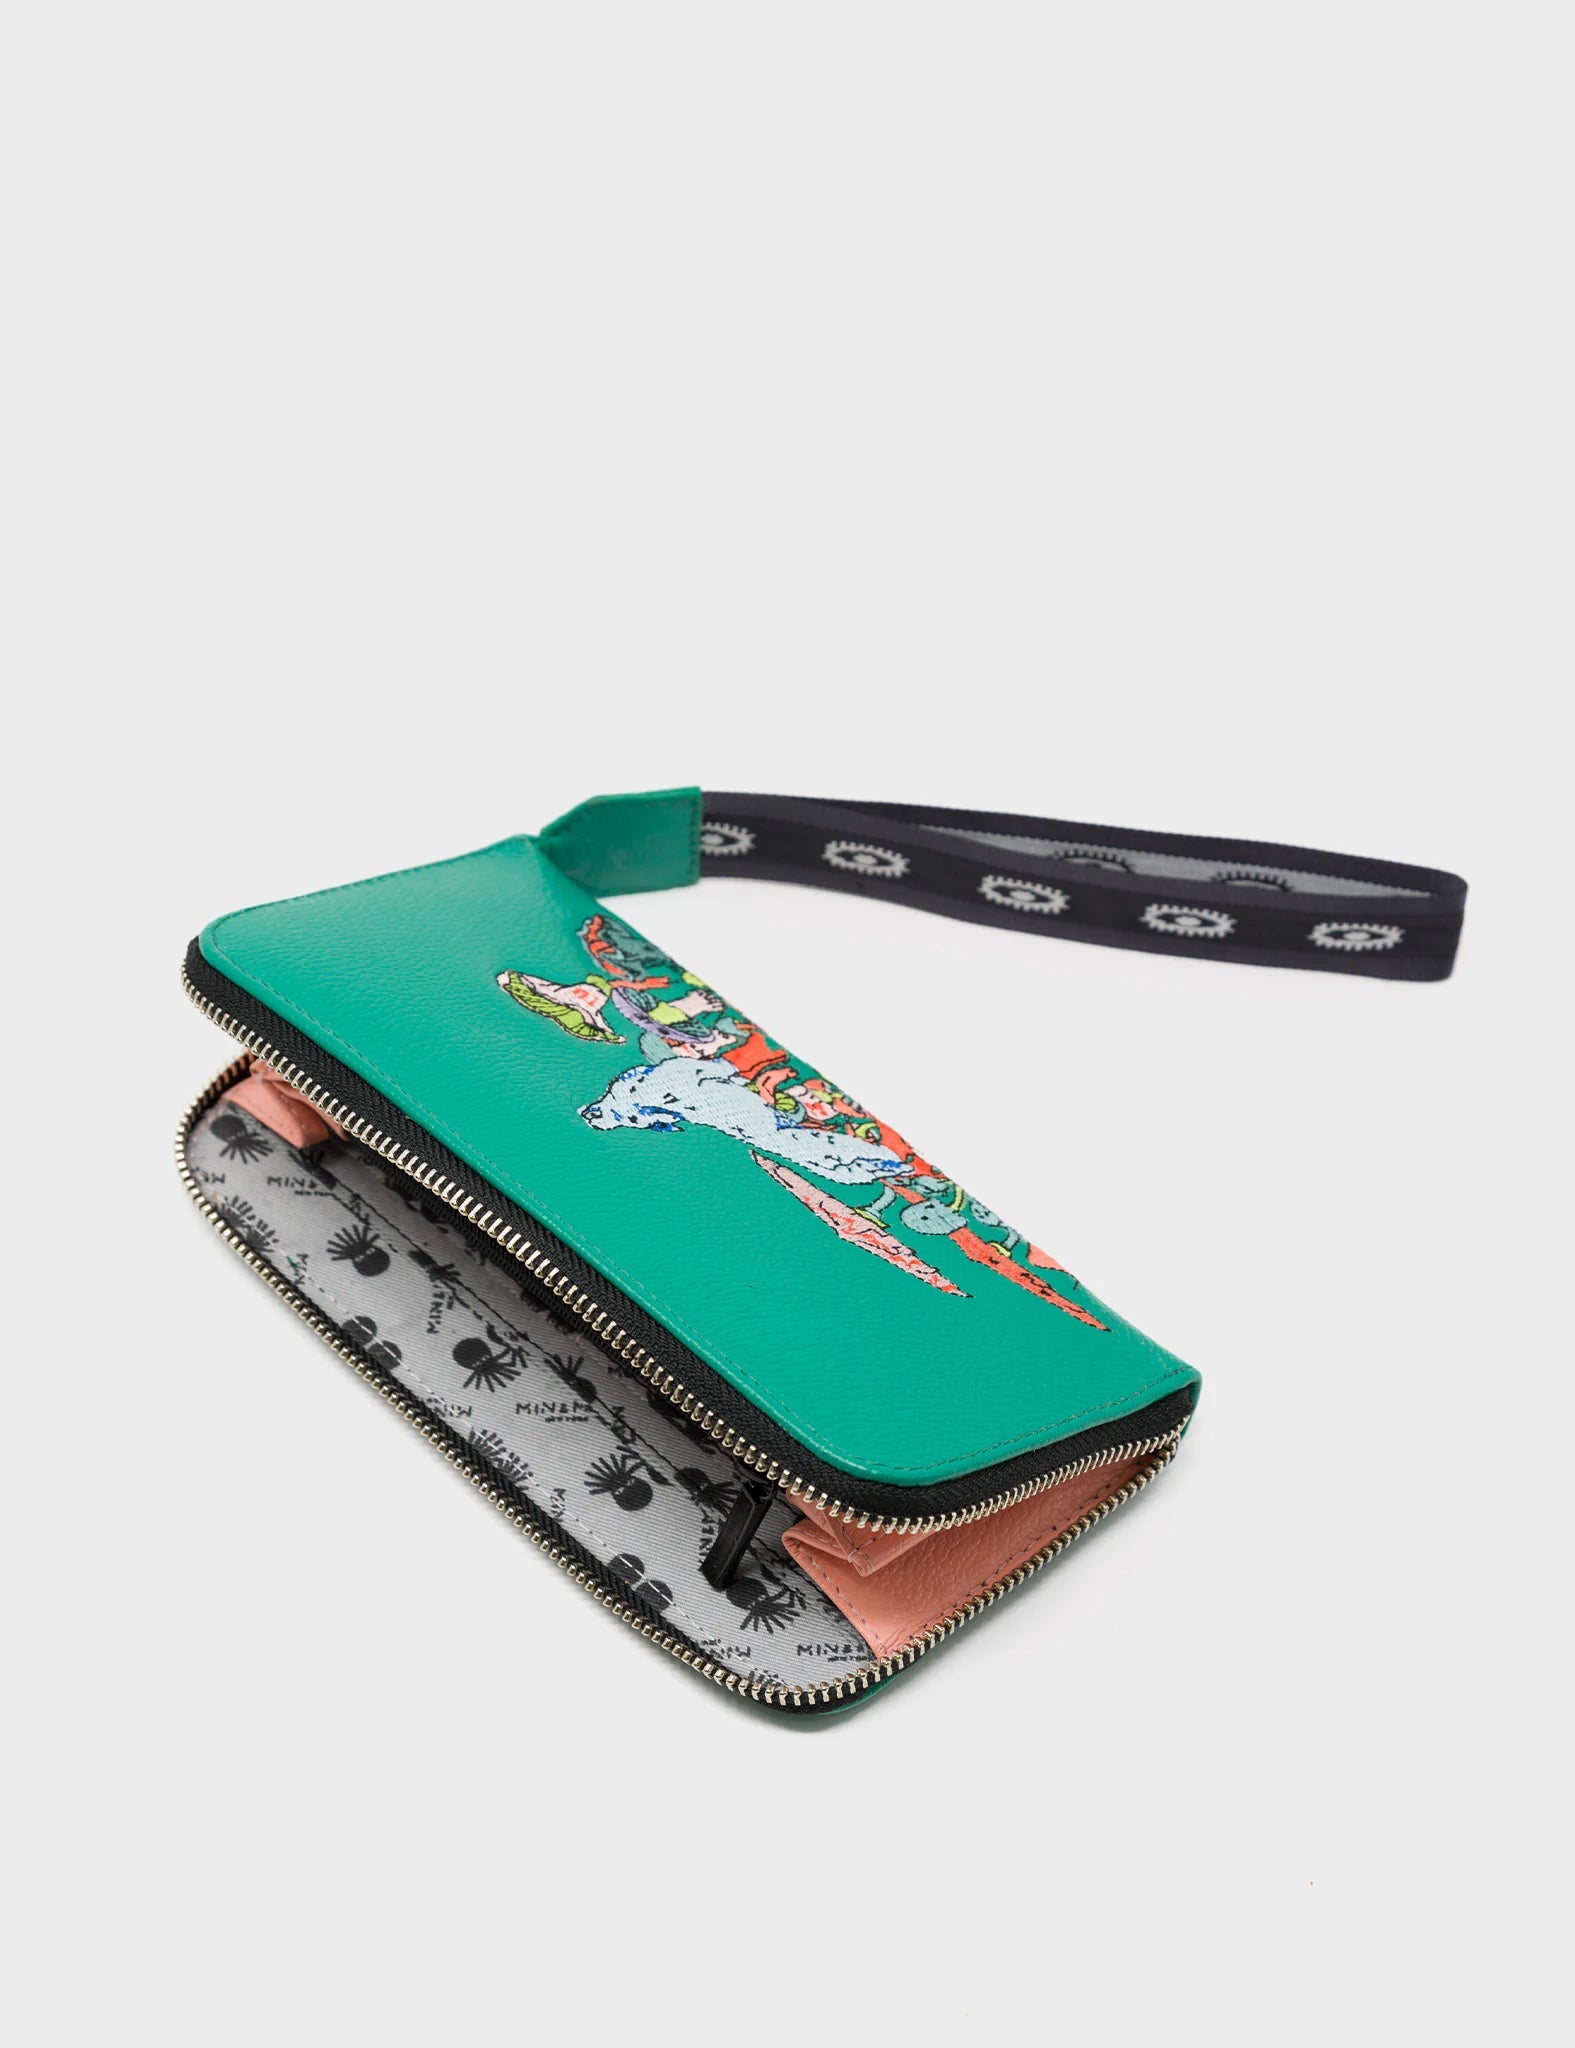 Francis Deep Green Leather Wallet -  Woodlands Embroidery - Inside 